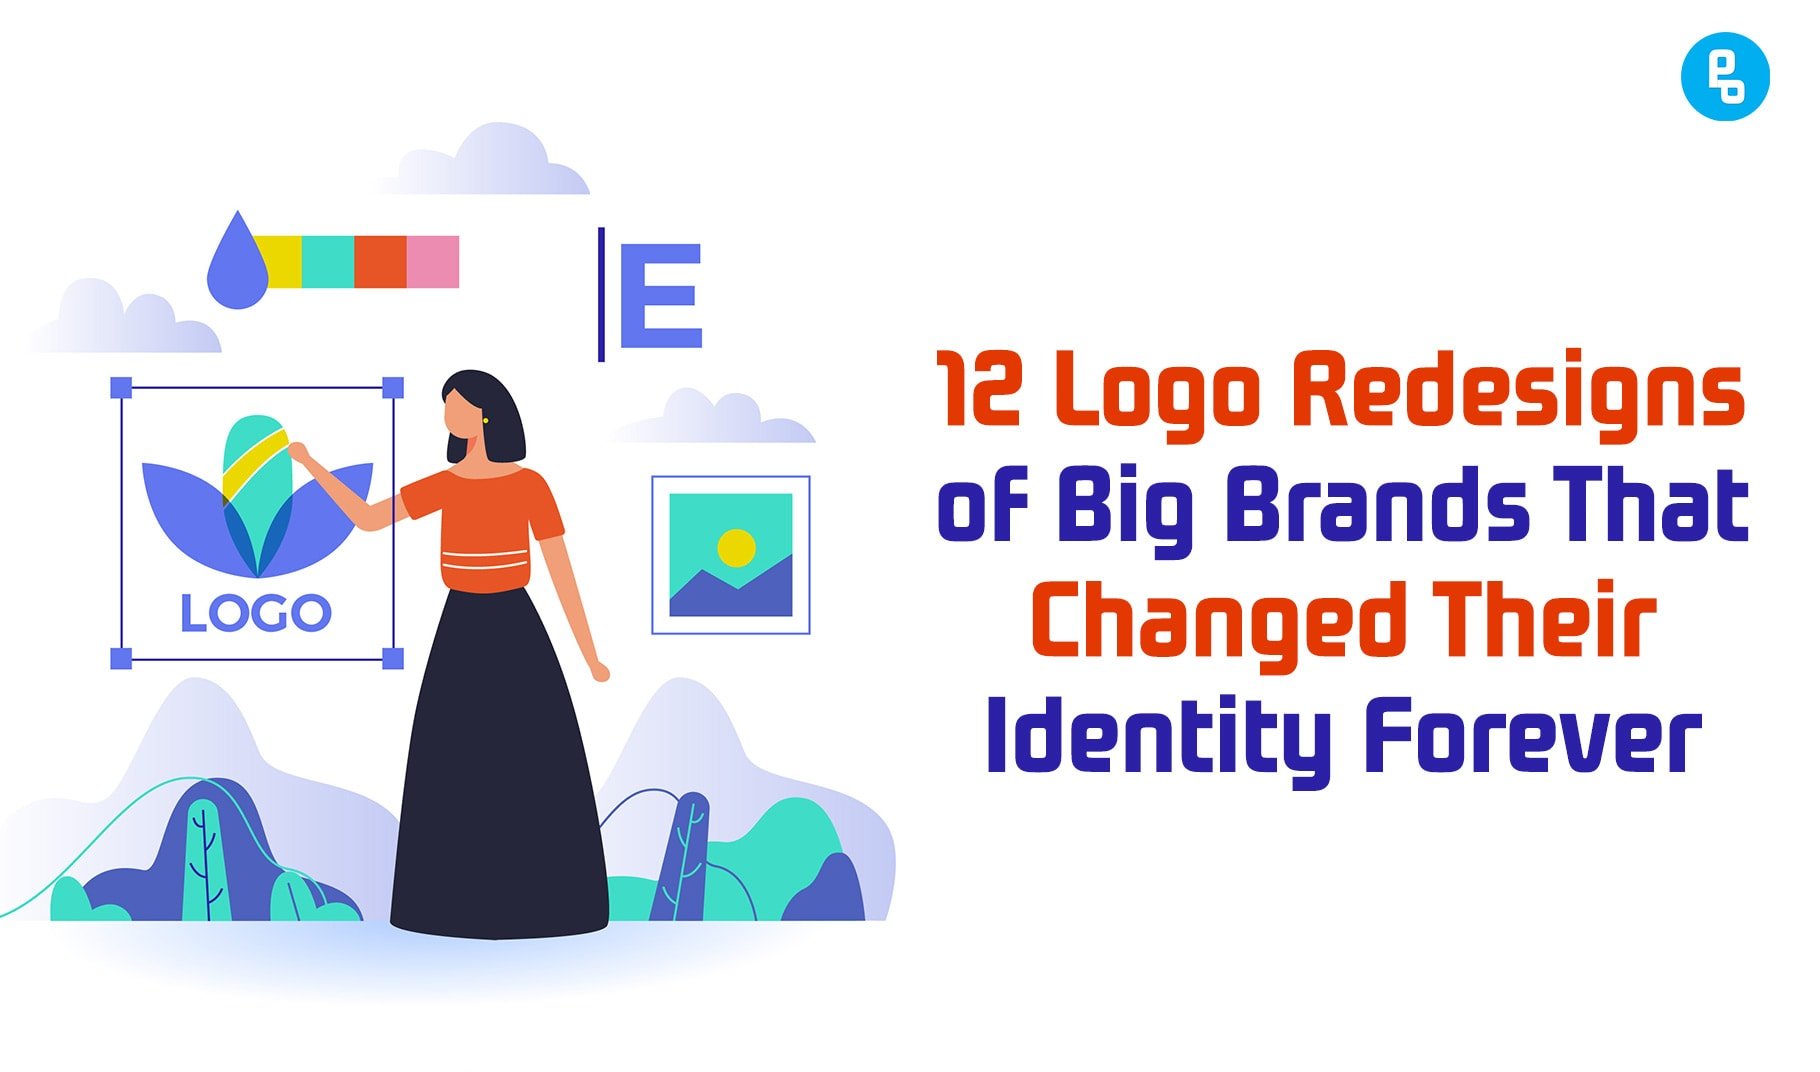 12 Logo Redesigns of Big Brands That Changed Their Identity Forever